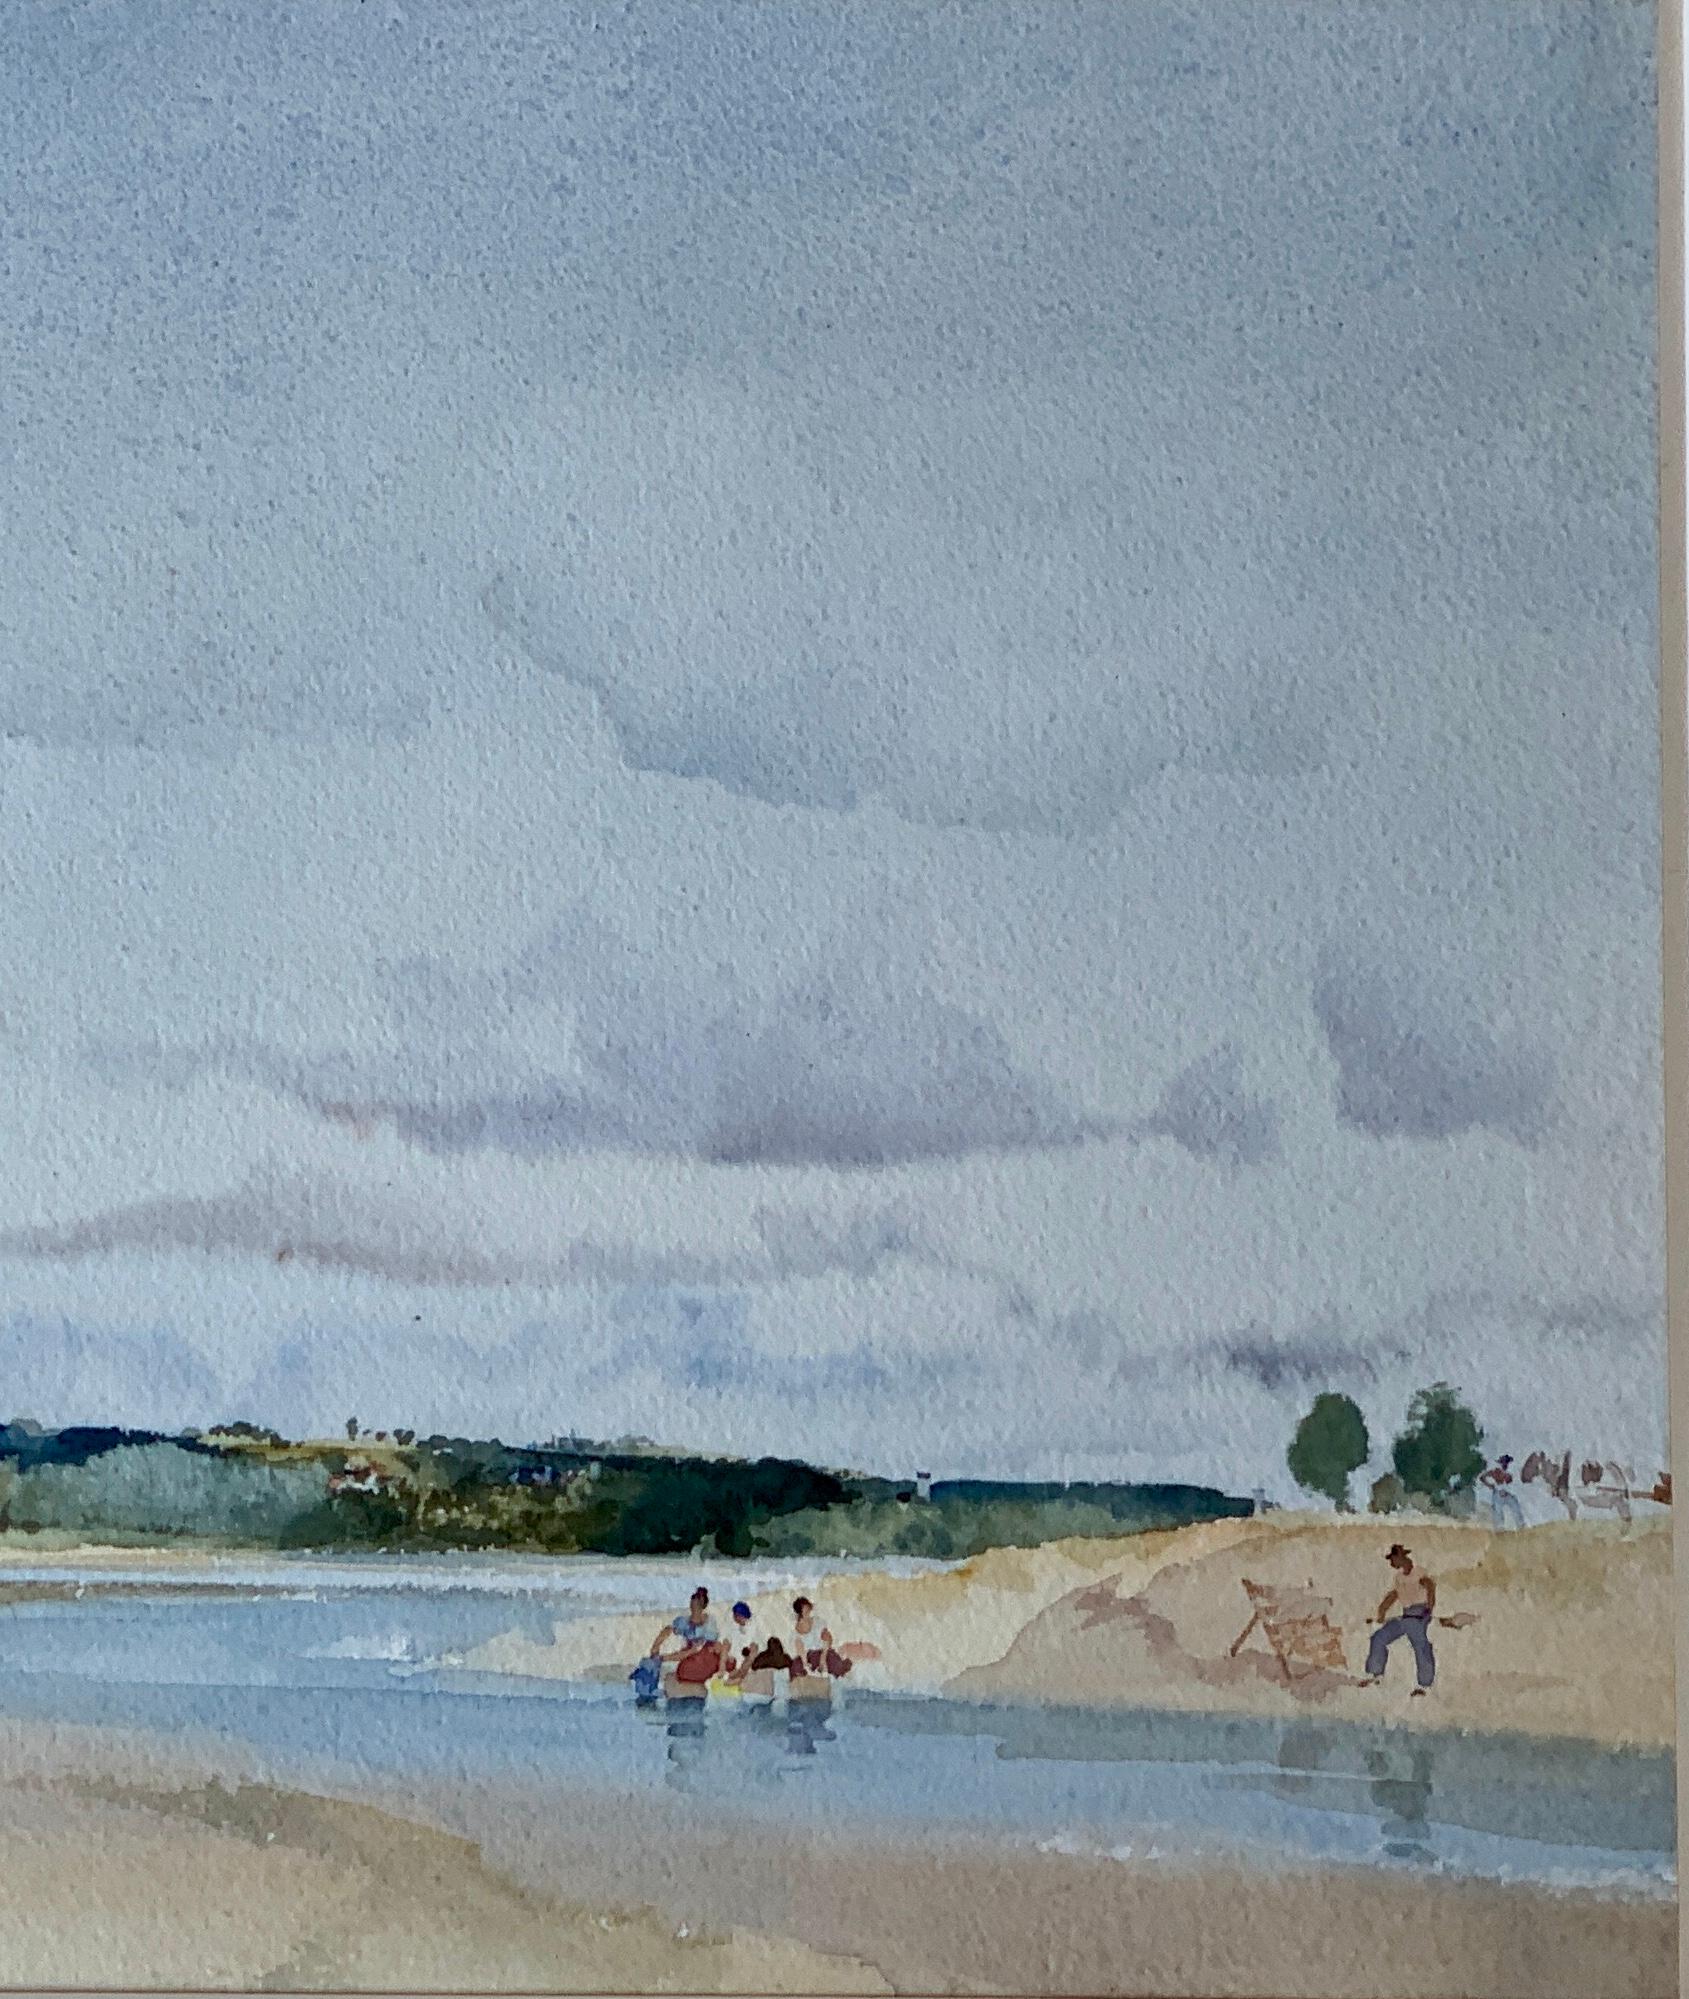 
“Morning on the Loire” is a soft, original impressionistic style watercolor on paper of a cloudy beach scene on the Loire River, the longest river in France, by the famous deceased listed Scottish painter, Sir William Russell Flint (1880-1969). The